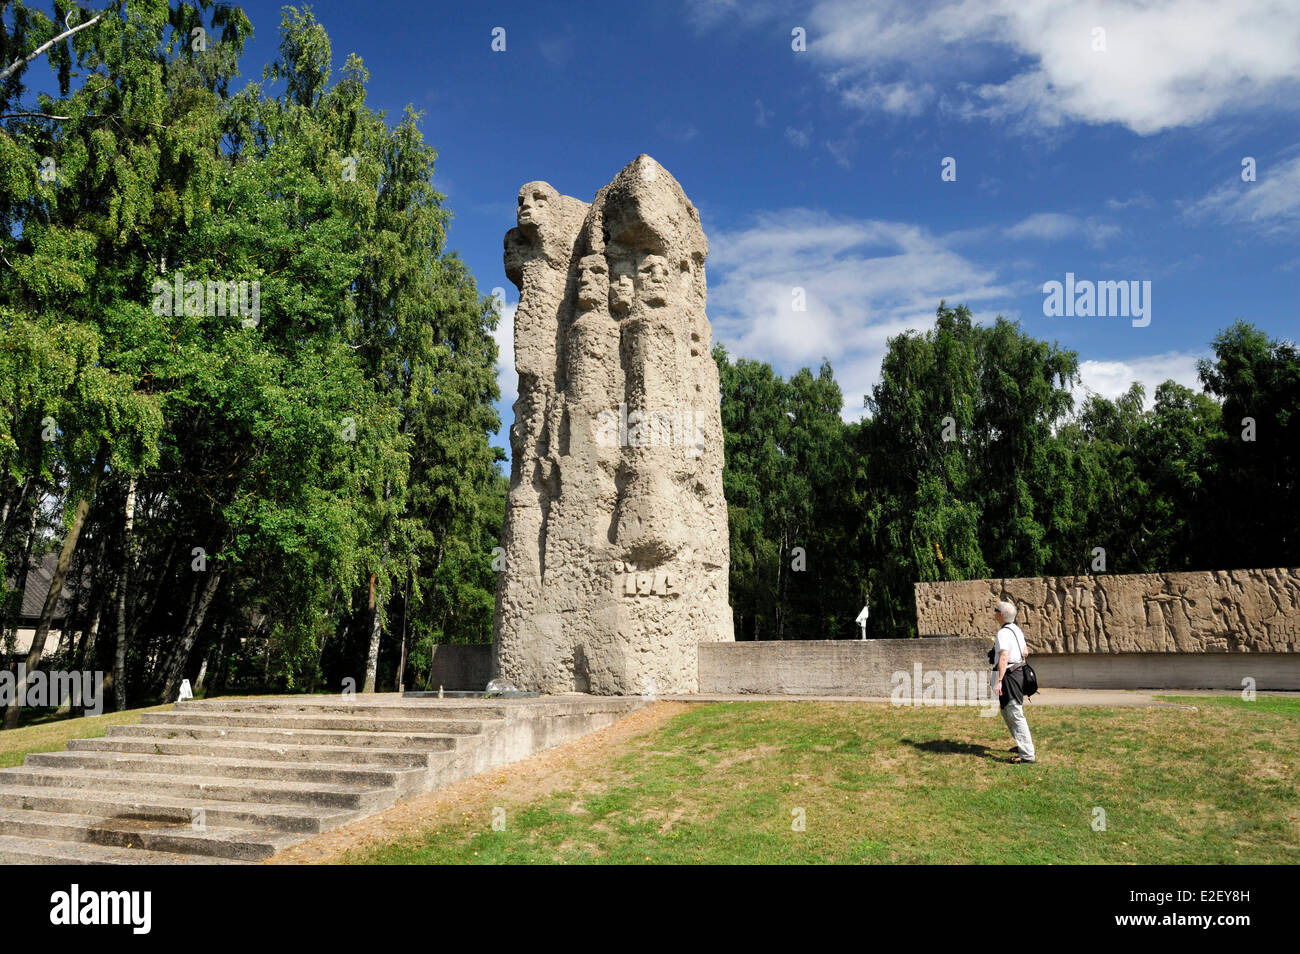 Poland, Pomerania, Sztutowo, concentration camp of Stutthof, Memorial built in 1968, man from behind looking at the sculpture Stock Photo